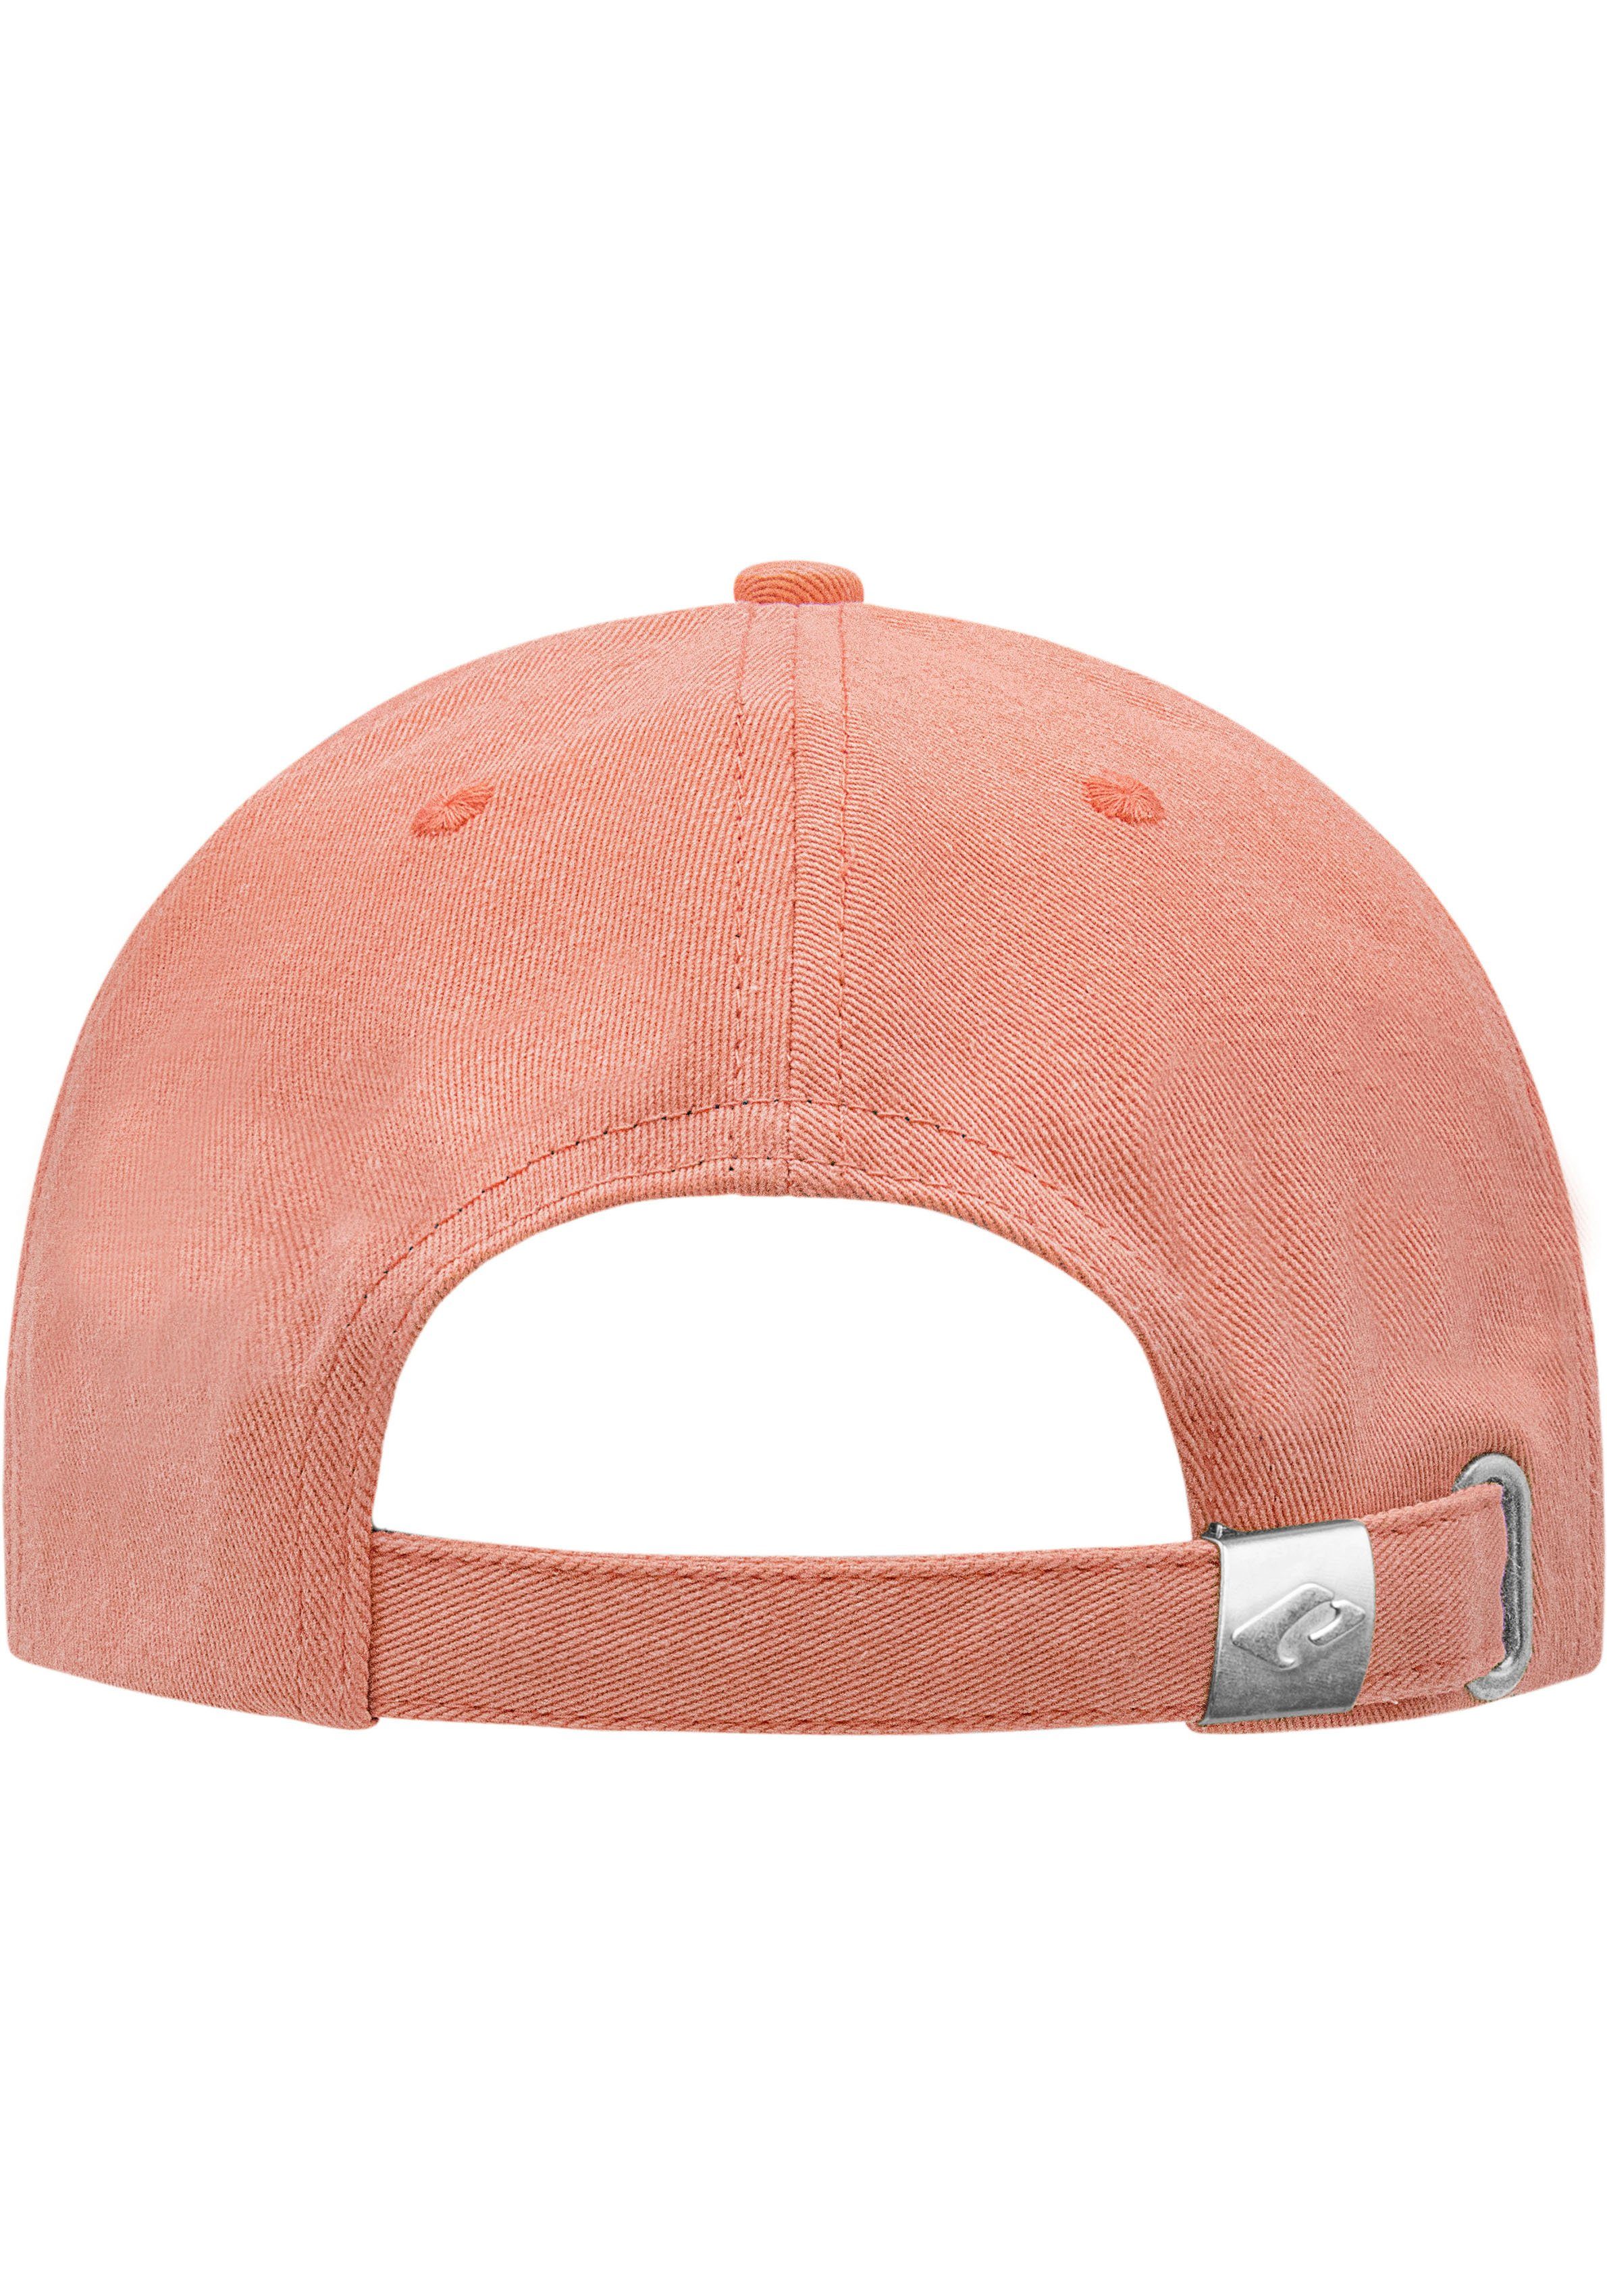 chillouts Baseball Hat Cap Arklow coral